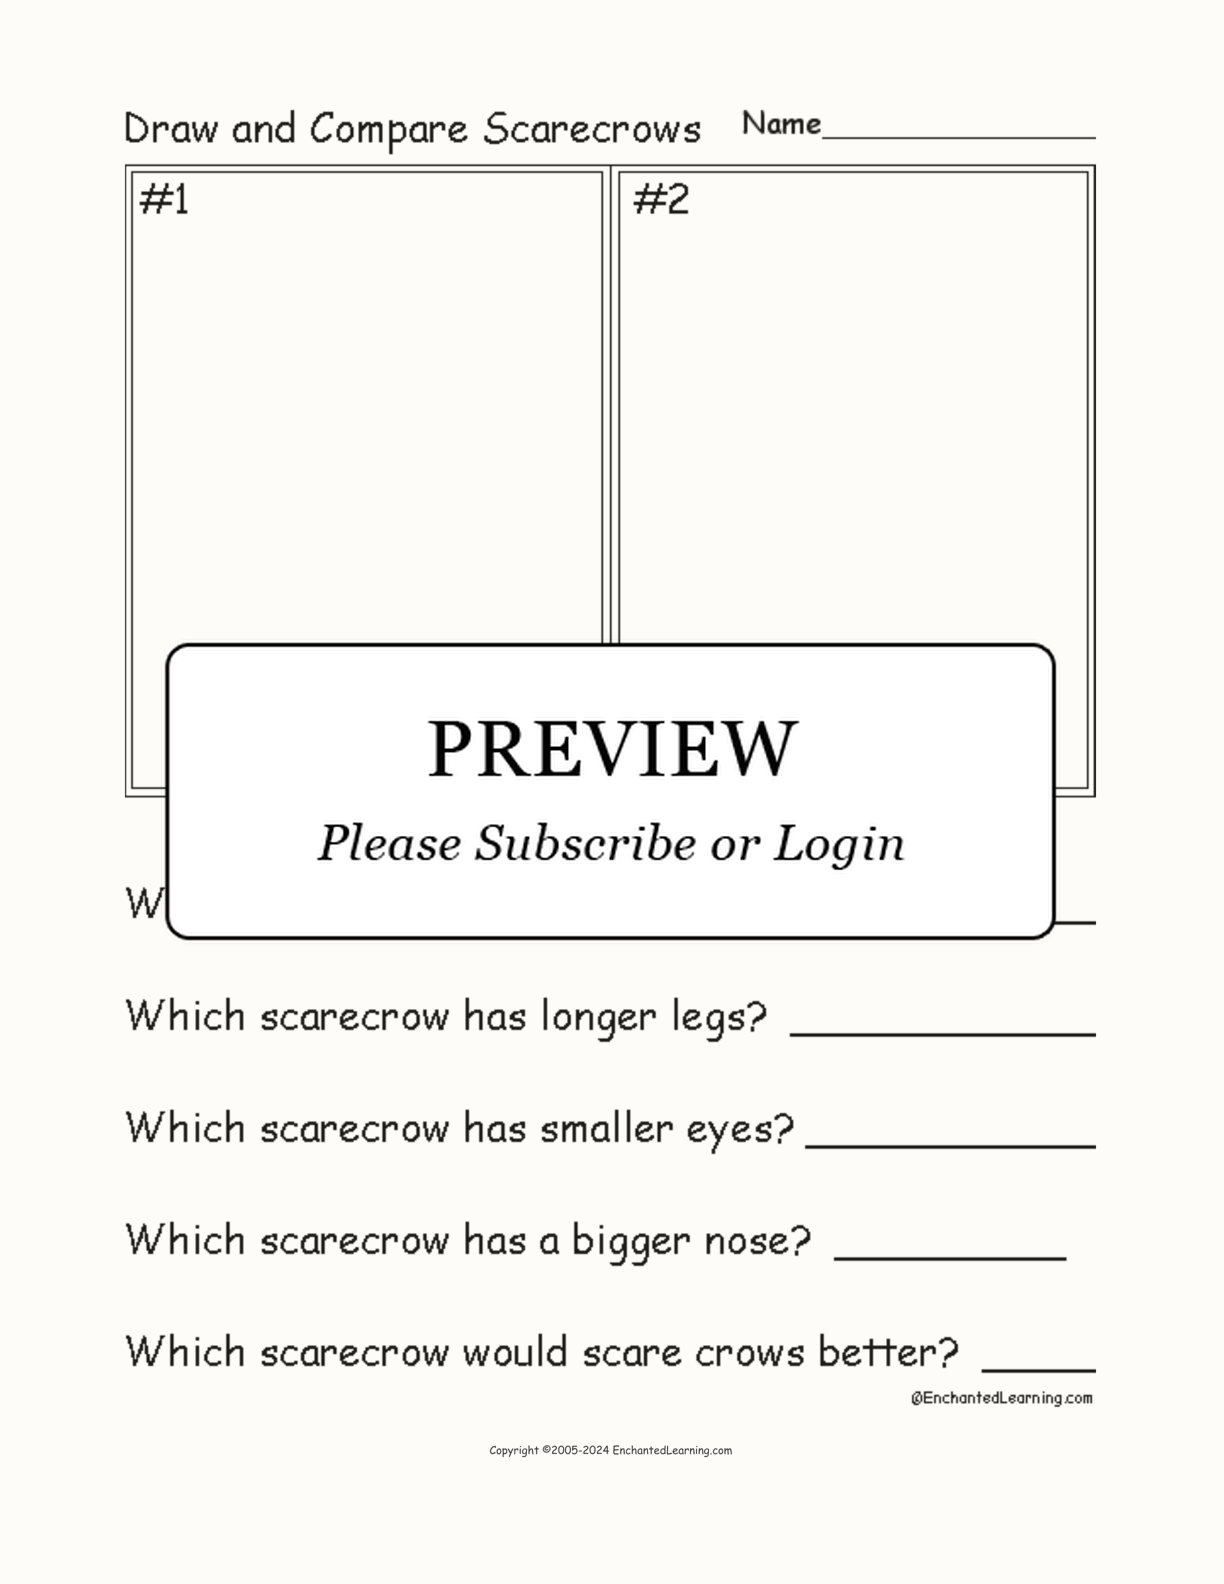 Draw and Compare Scarecrows interactive worksheet page 1